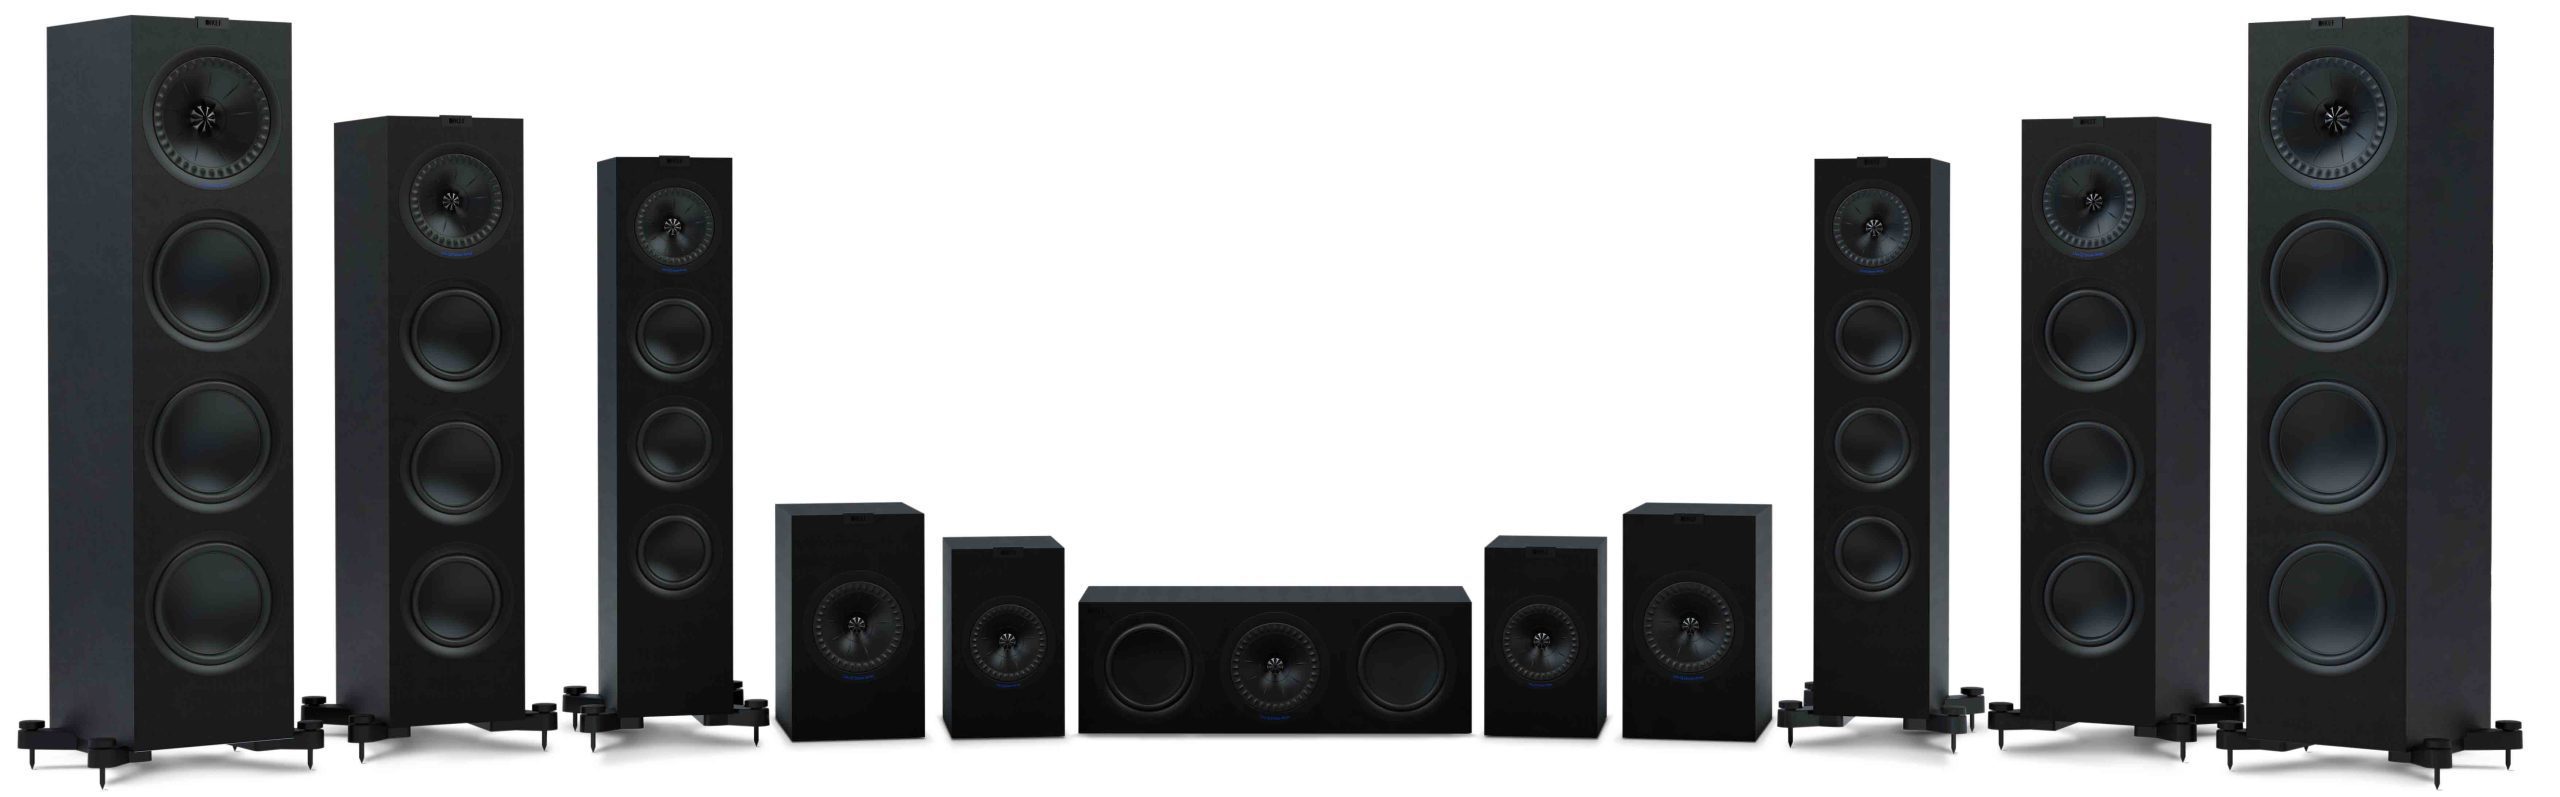 Kef Q speakers available to buy in castle hill Sydney NSW 2154